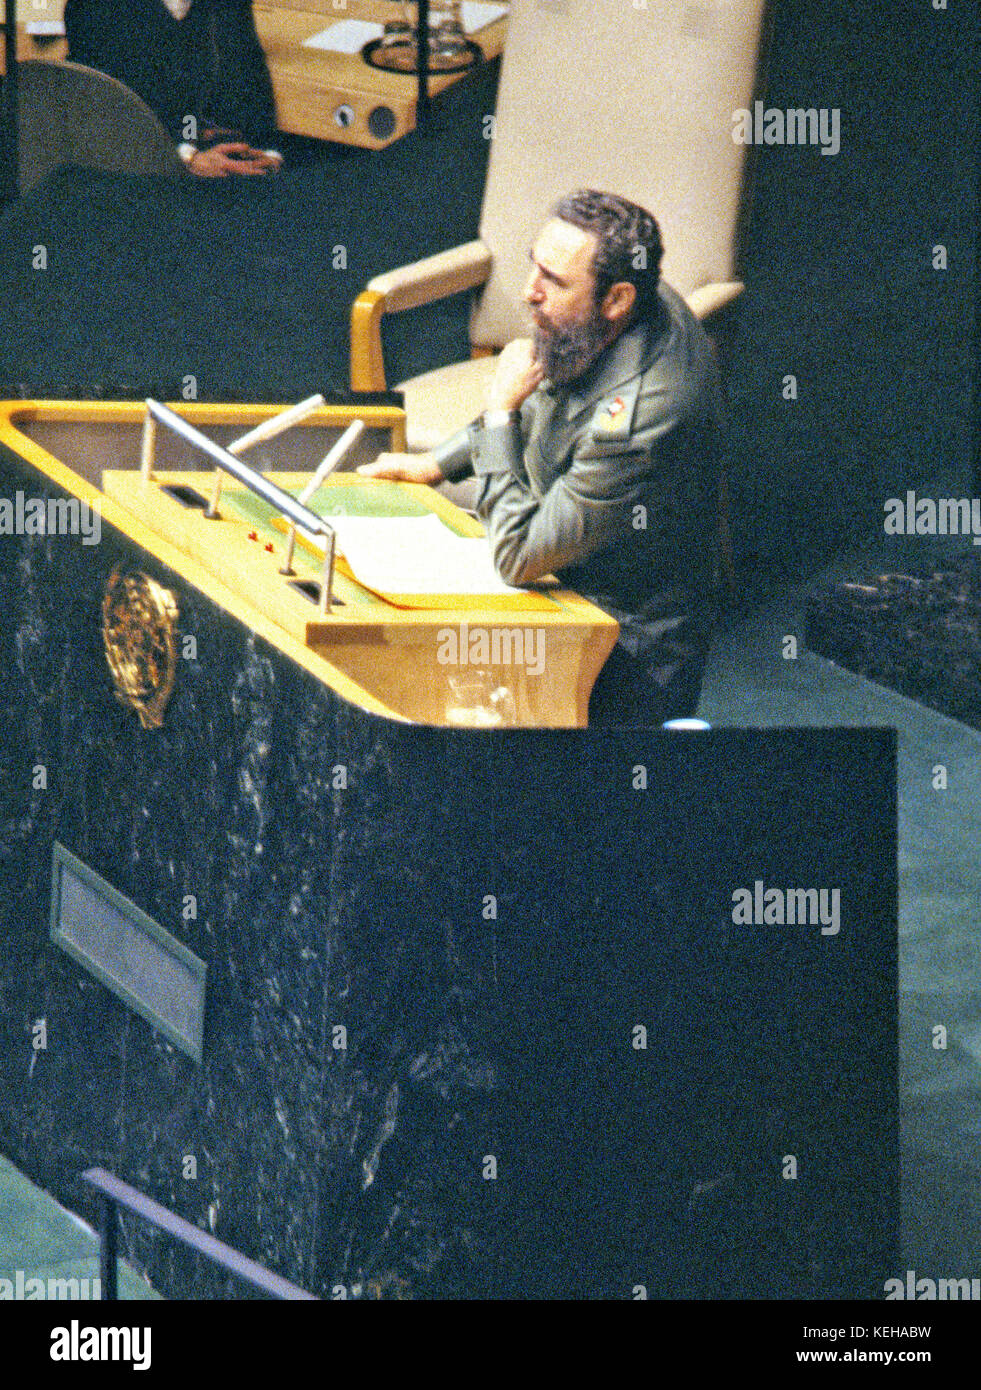 President Fidel Castro of Cuba addresses the United Nations General Assembly in New York, New York on October 15, 1979.  Castro's speech discussed the disparity between the world’s rich and the world's poor. Credit: Arnie Sachs / CNP /MediaPunch Stock Photo